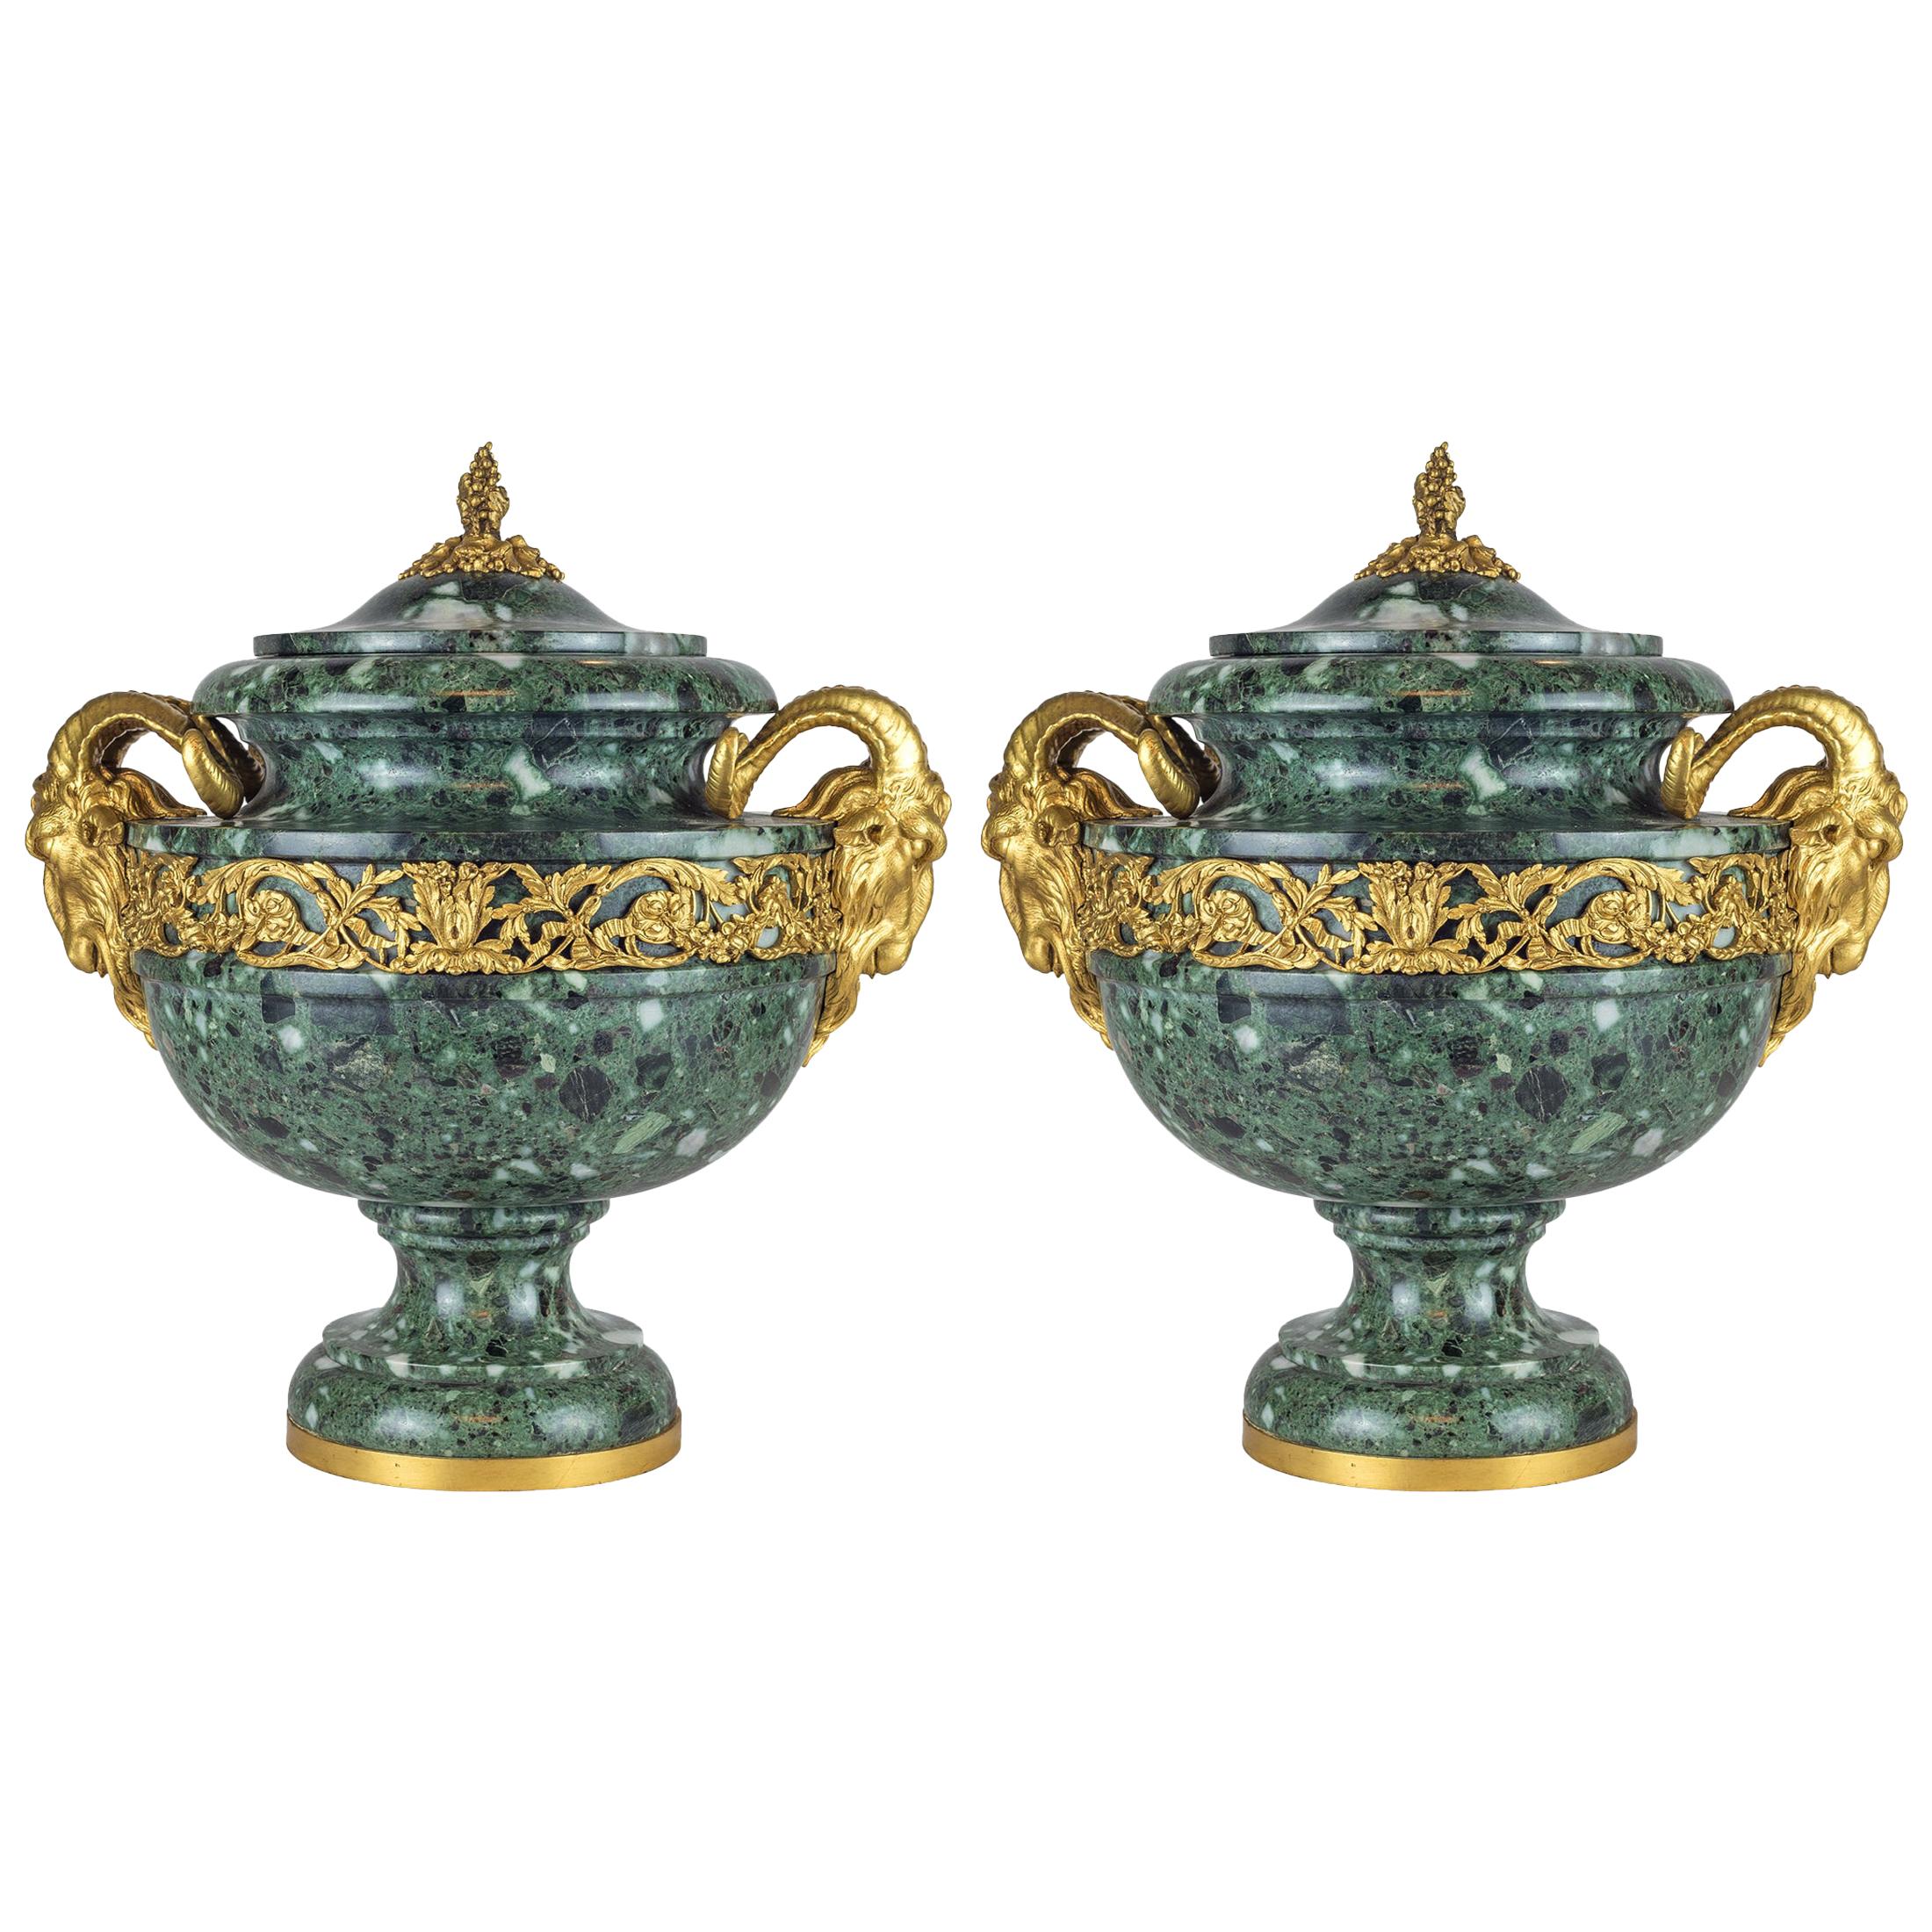 19th Century Pair of Louis XVI Style Ormolu Verde Antico Mounted Marble Urns For Sale